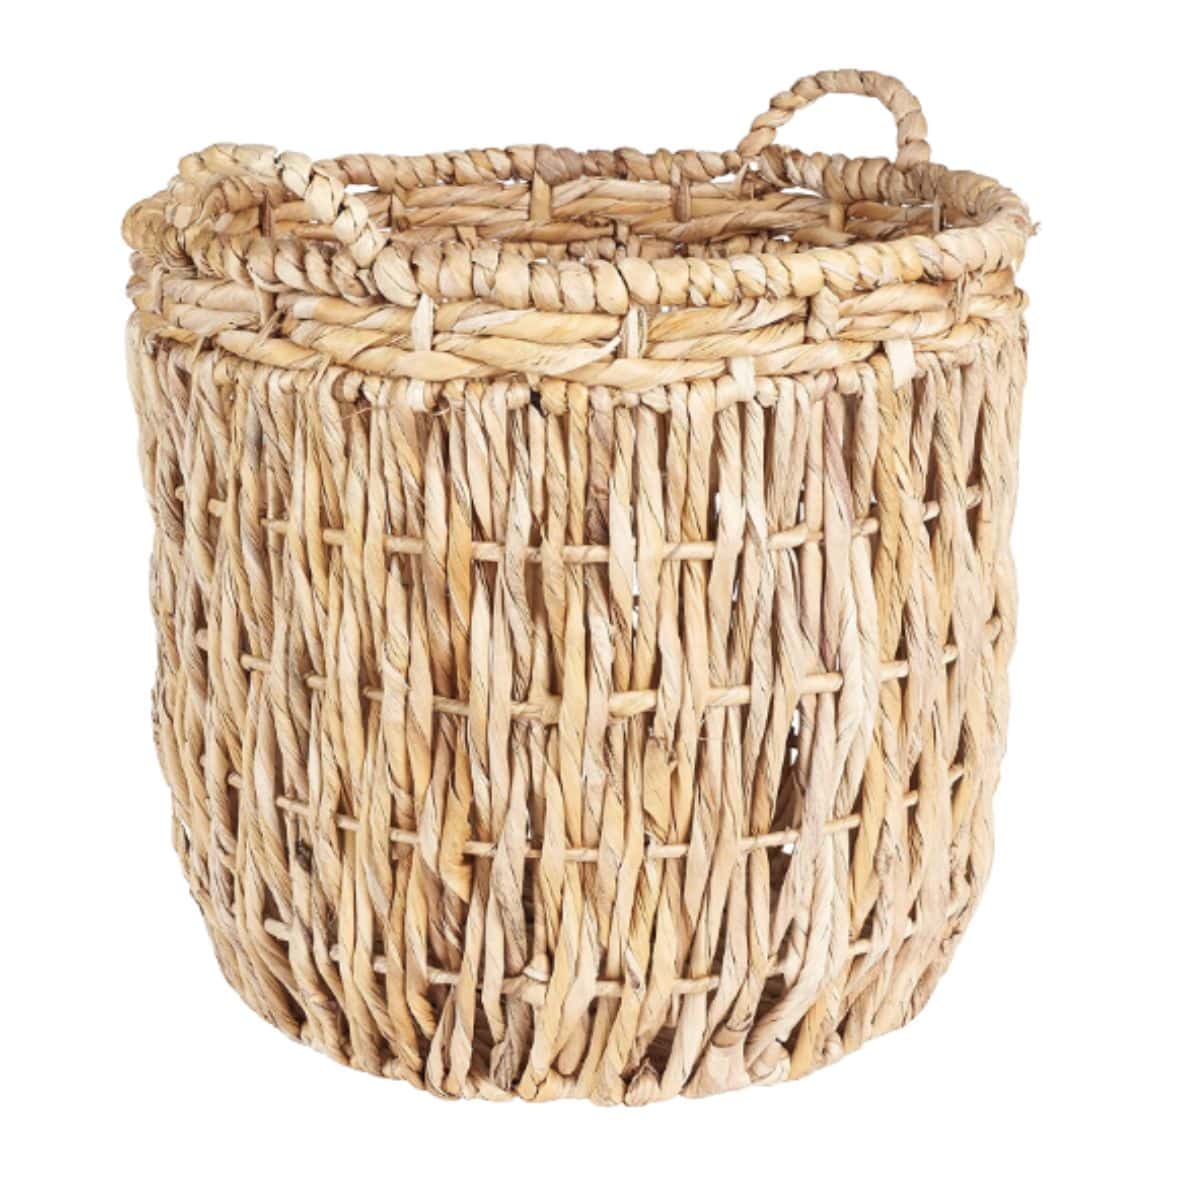 Banana Leaf Large Plant Basket with handles to buy from Amazon